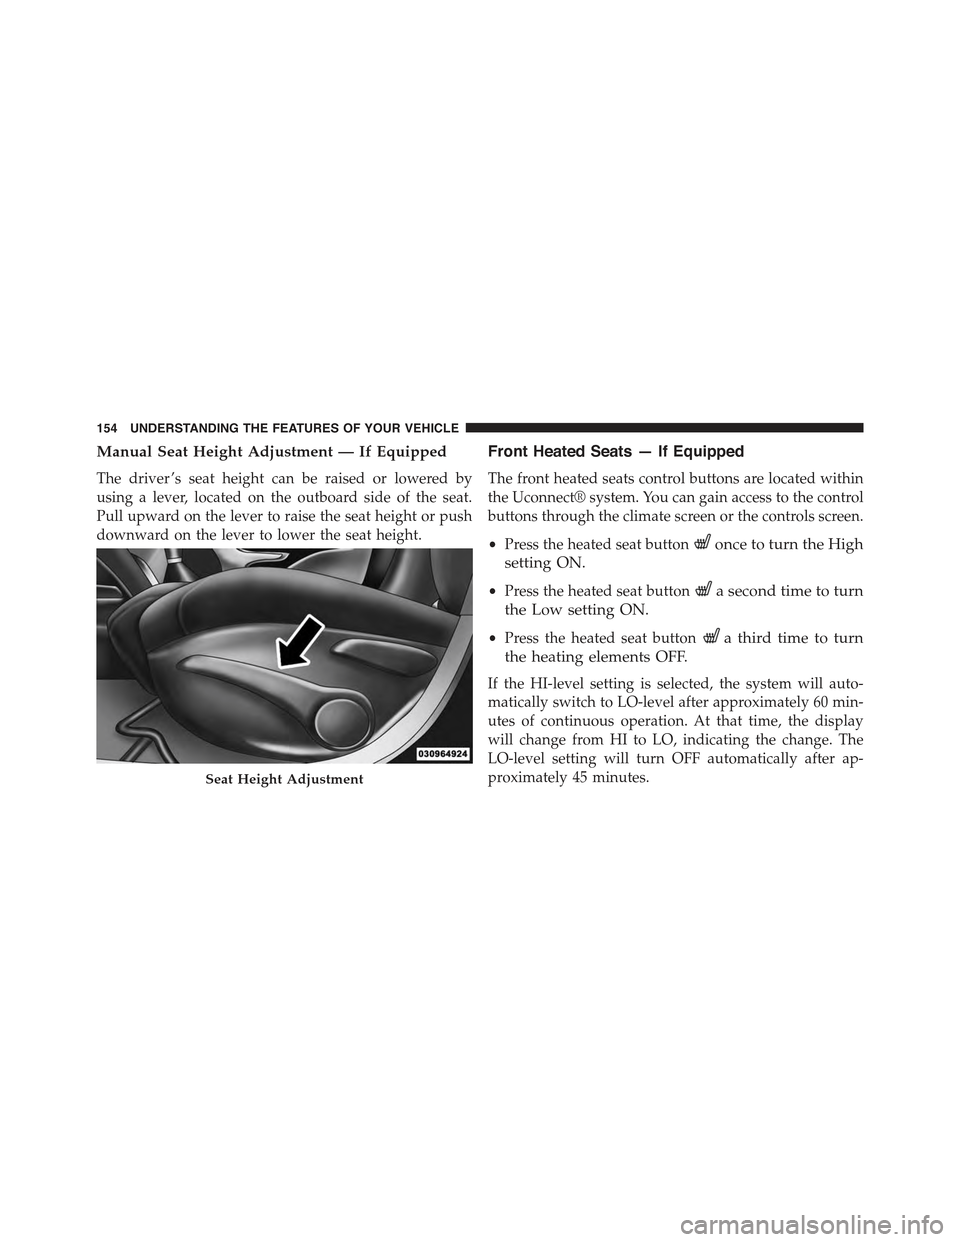 JEEP CHEROKEE 2015 KL / 5.G Owners Manual Manual Seat Height Adjustment — If Equipped
The driver ’s seat height can be raised or lowered by
using a lever, located on the outboard side of the seat.
Pull upward on the lever to raise the sea